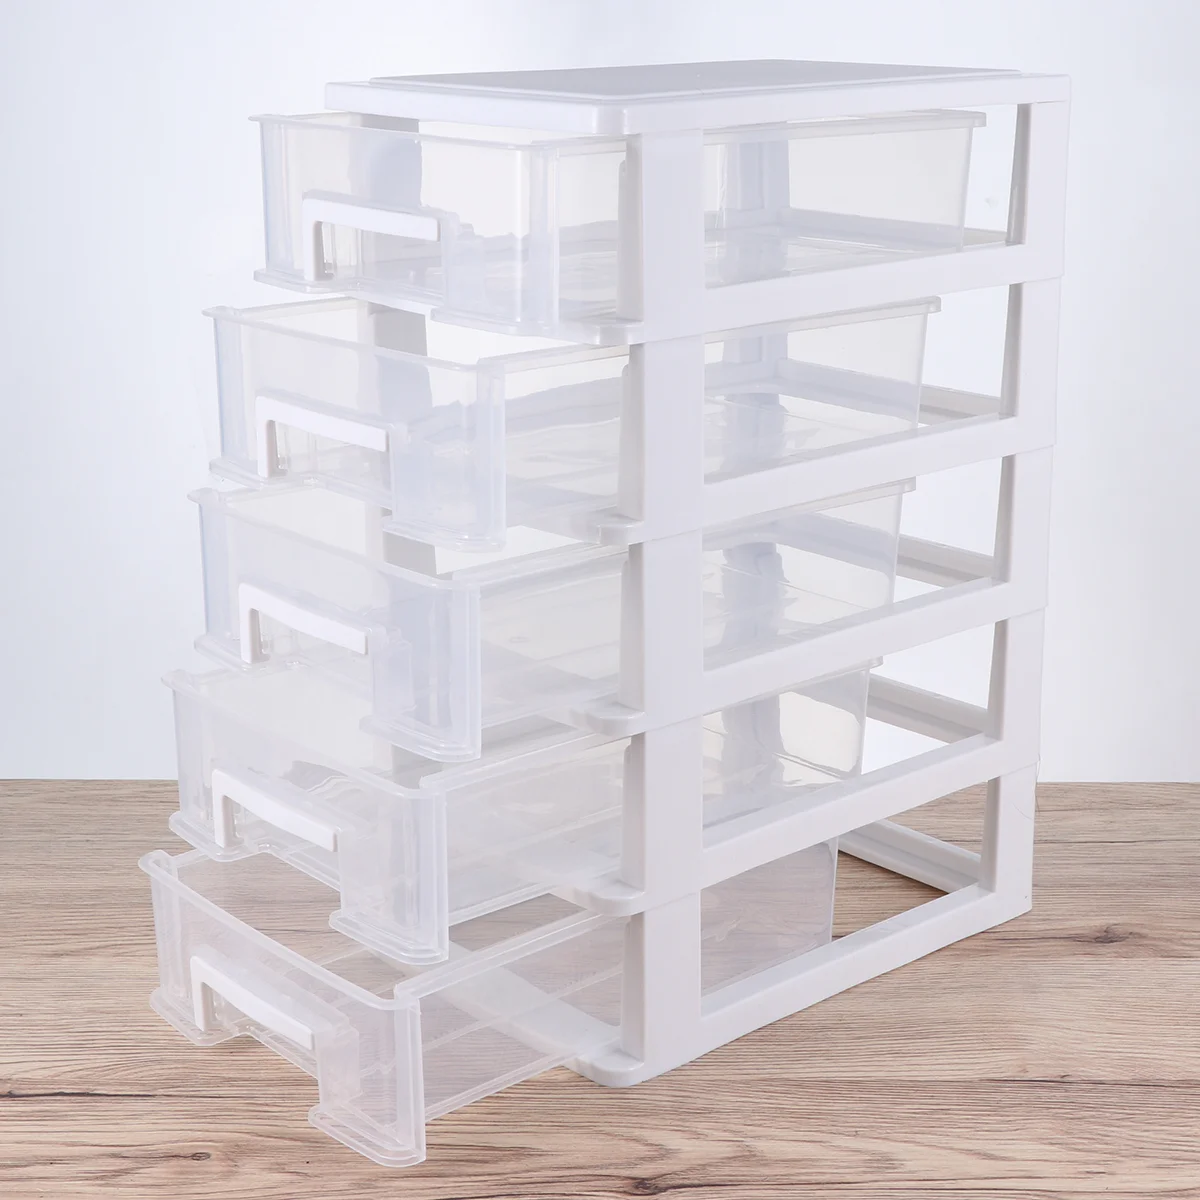 

Makeup Storage Box Clear Silverware Organizer Stationary Holder Storage Bins Clothes Cupboard Plastic Drawers Boxes